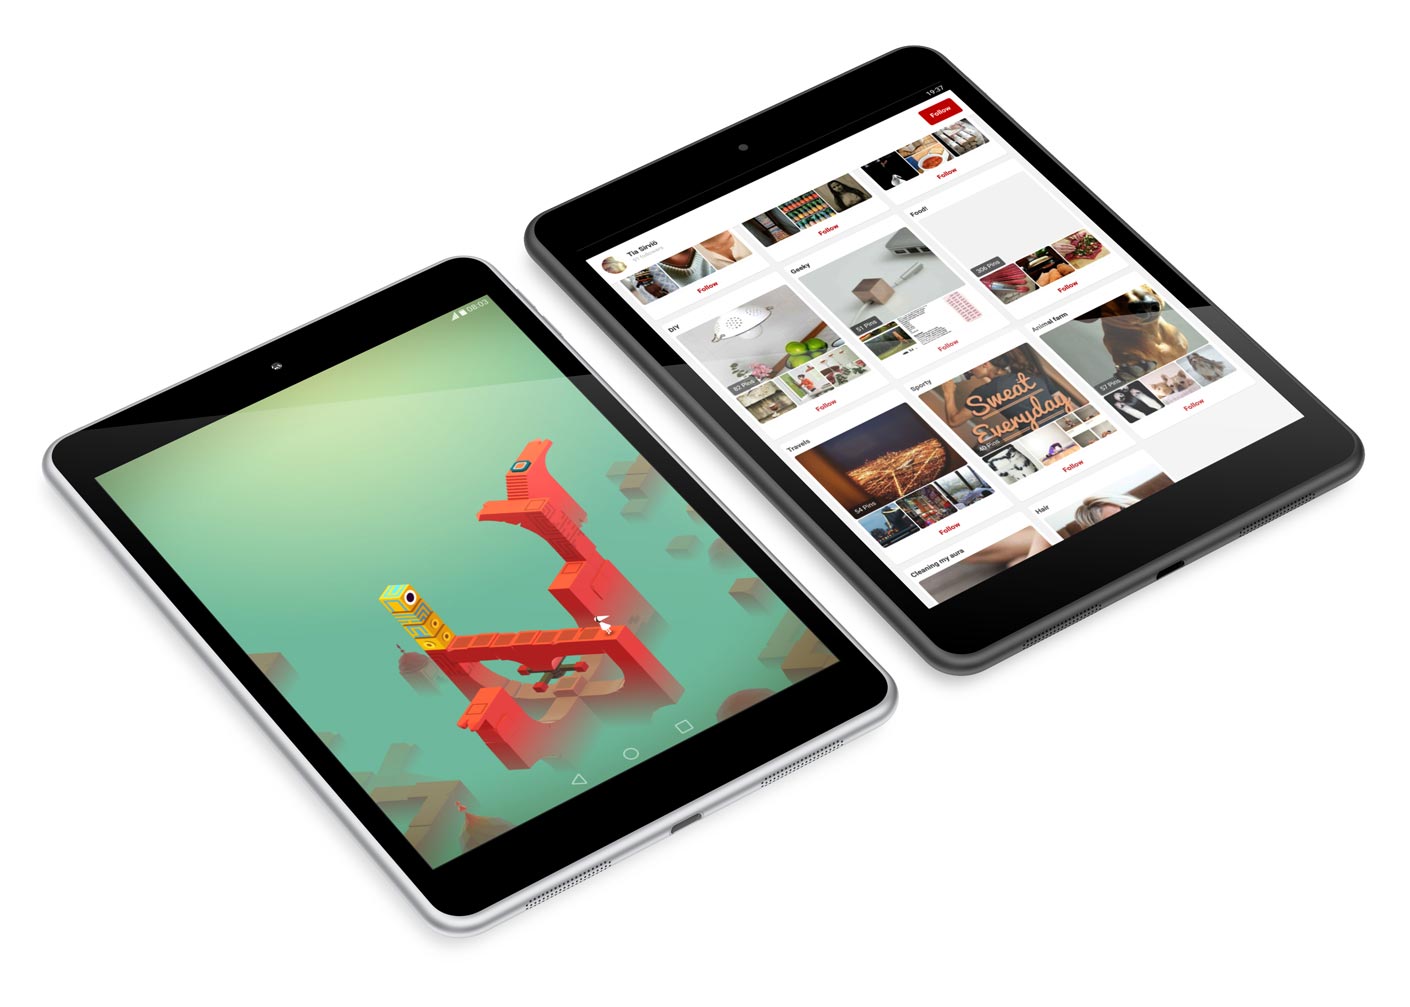 Nokia N1 : An iPad Clone That came out of the blue to Surprise us all